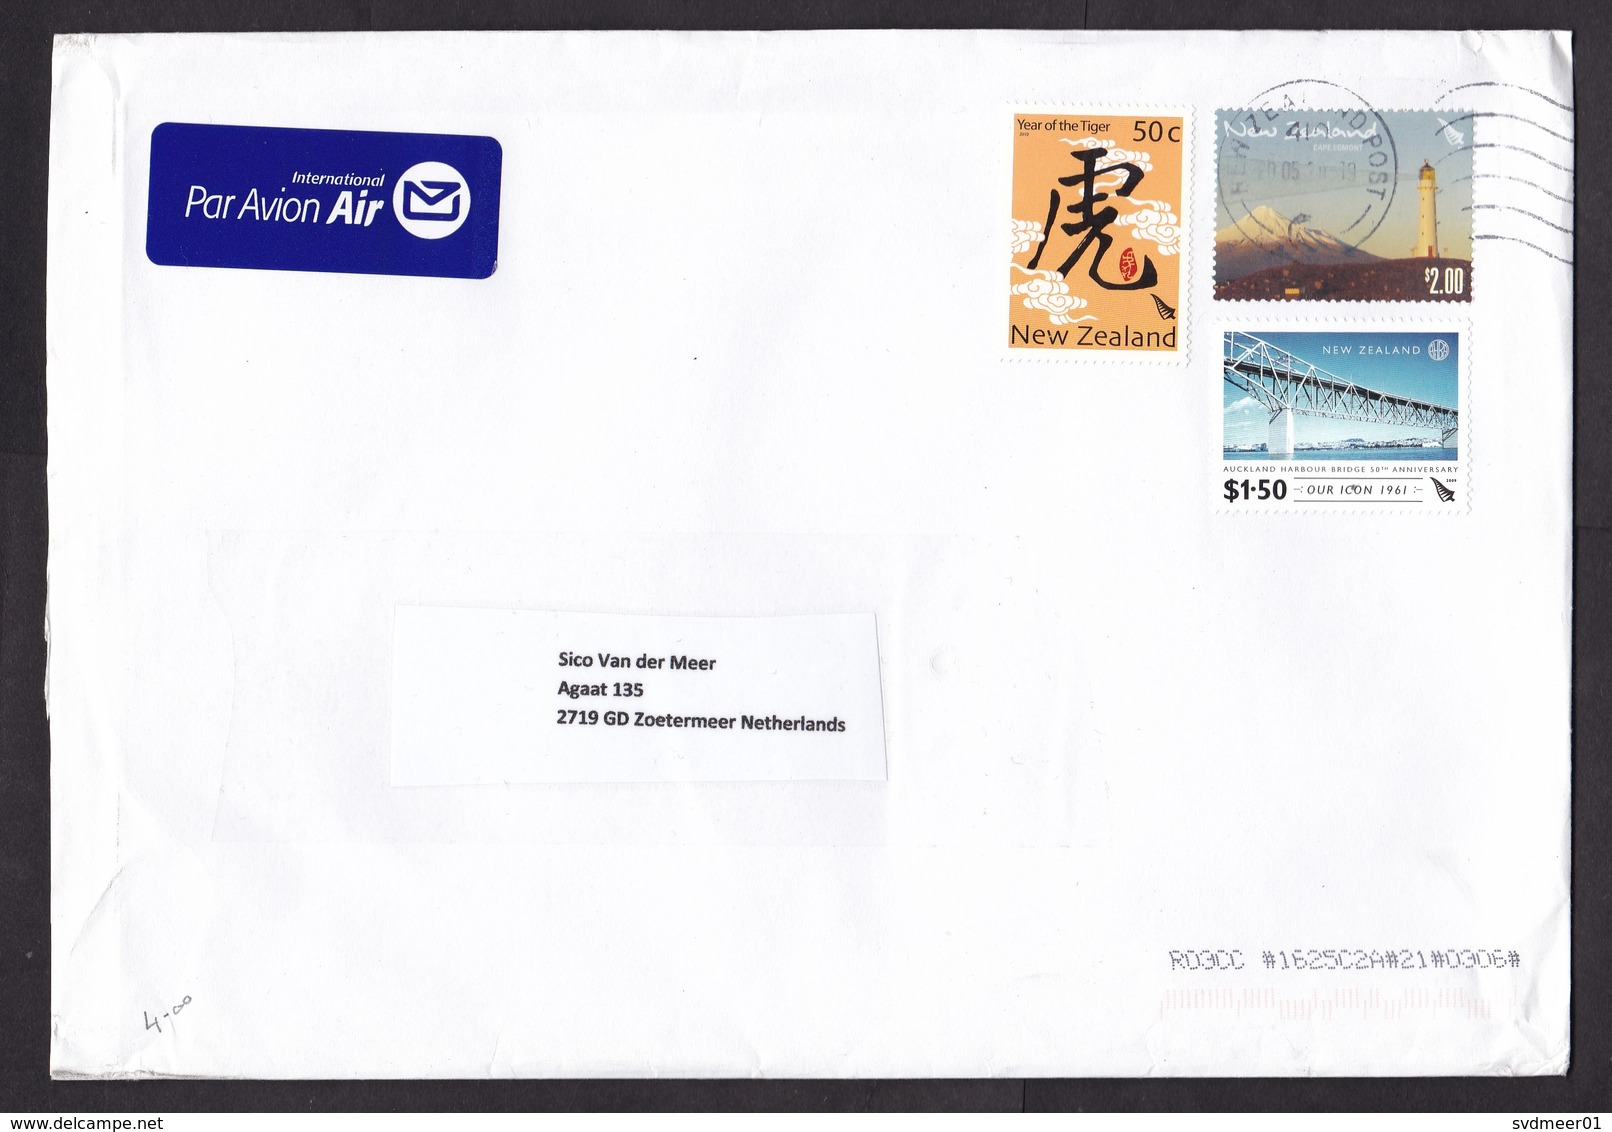 New Zealand: Airmail Cover To Netherlands, 2019, 3 Stamps, Lighthouse, Bridge, Year Of Tiger, Air Label (minor Creases) - Brieven En Documenten